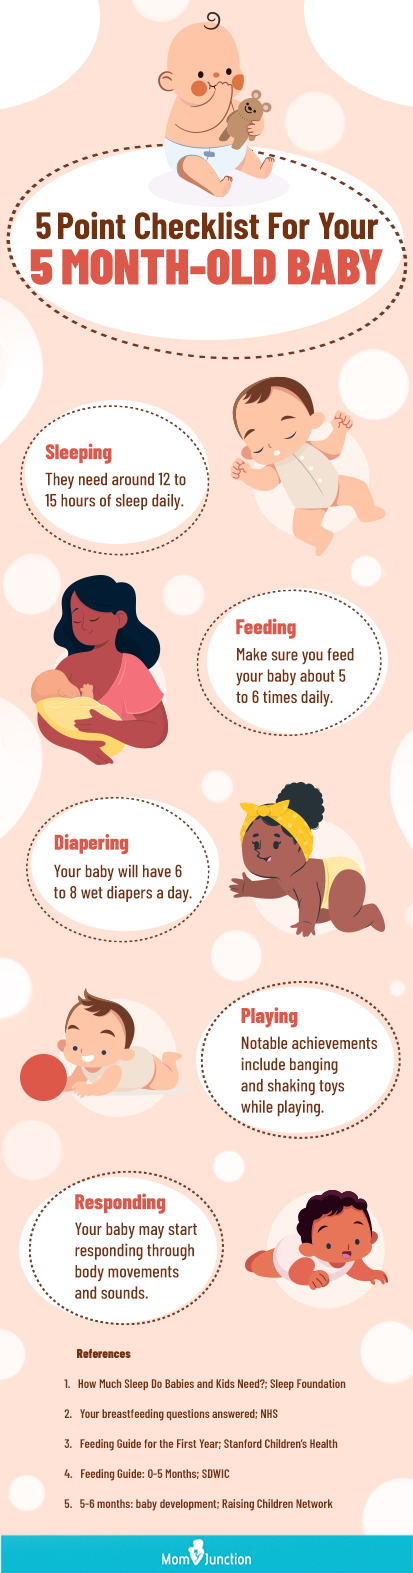 checklist for your 5 month old baby [infographic]